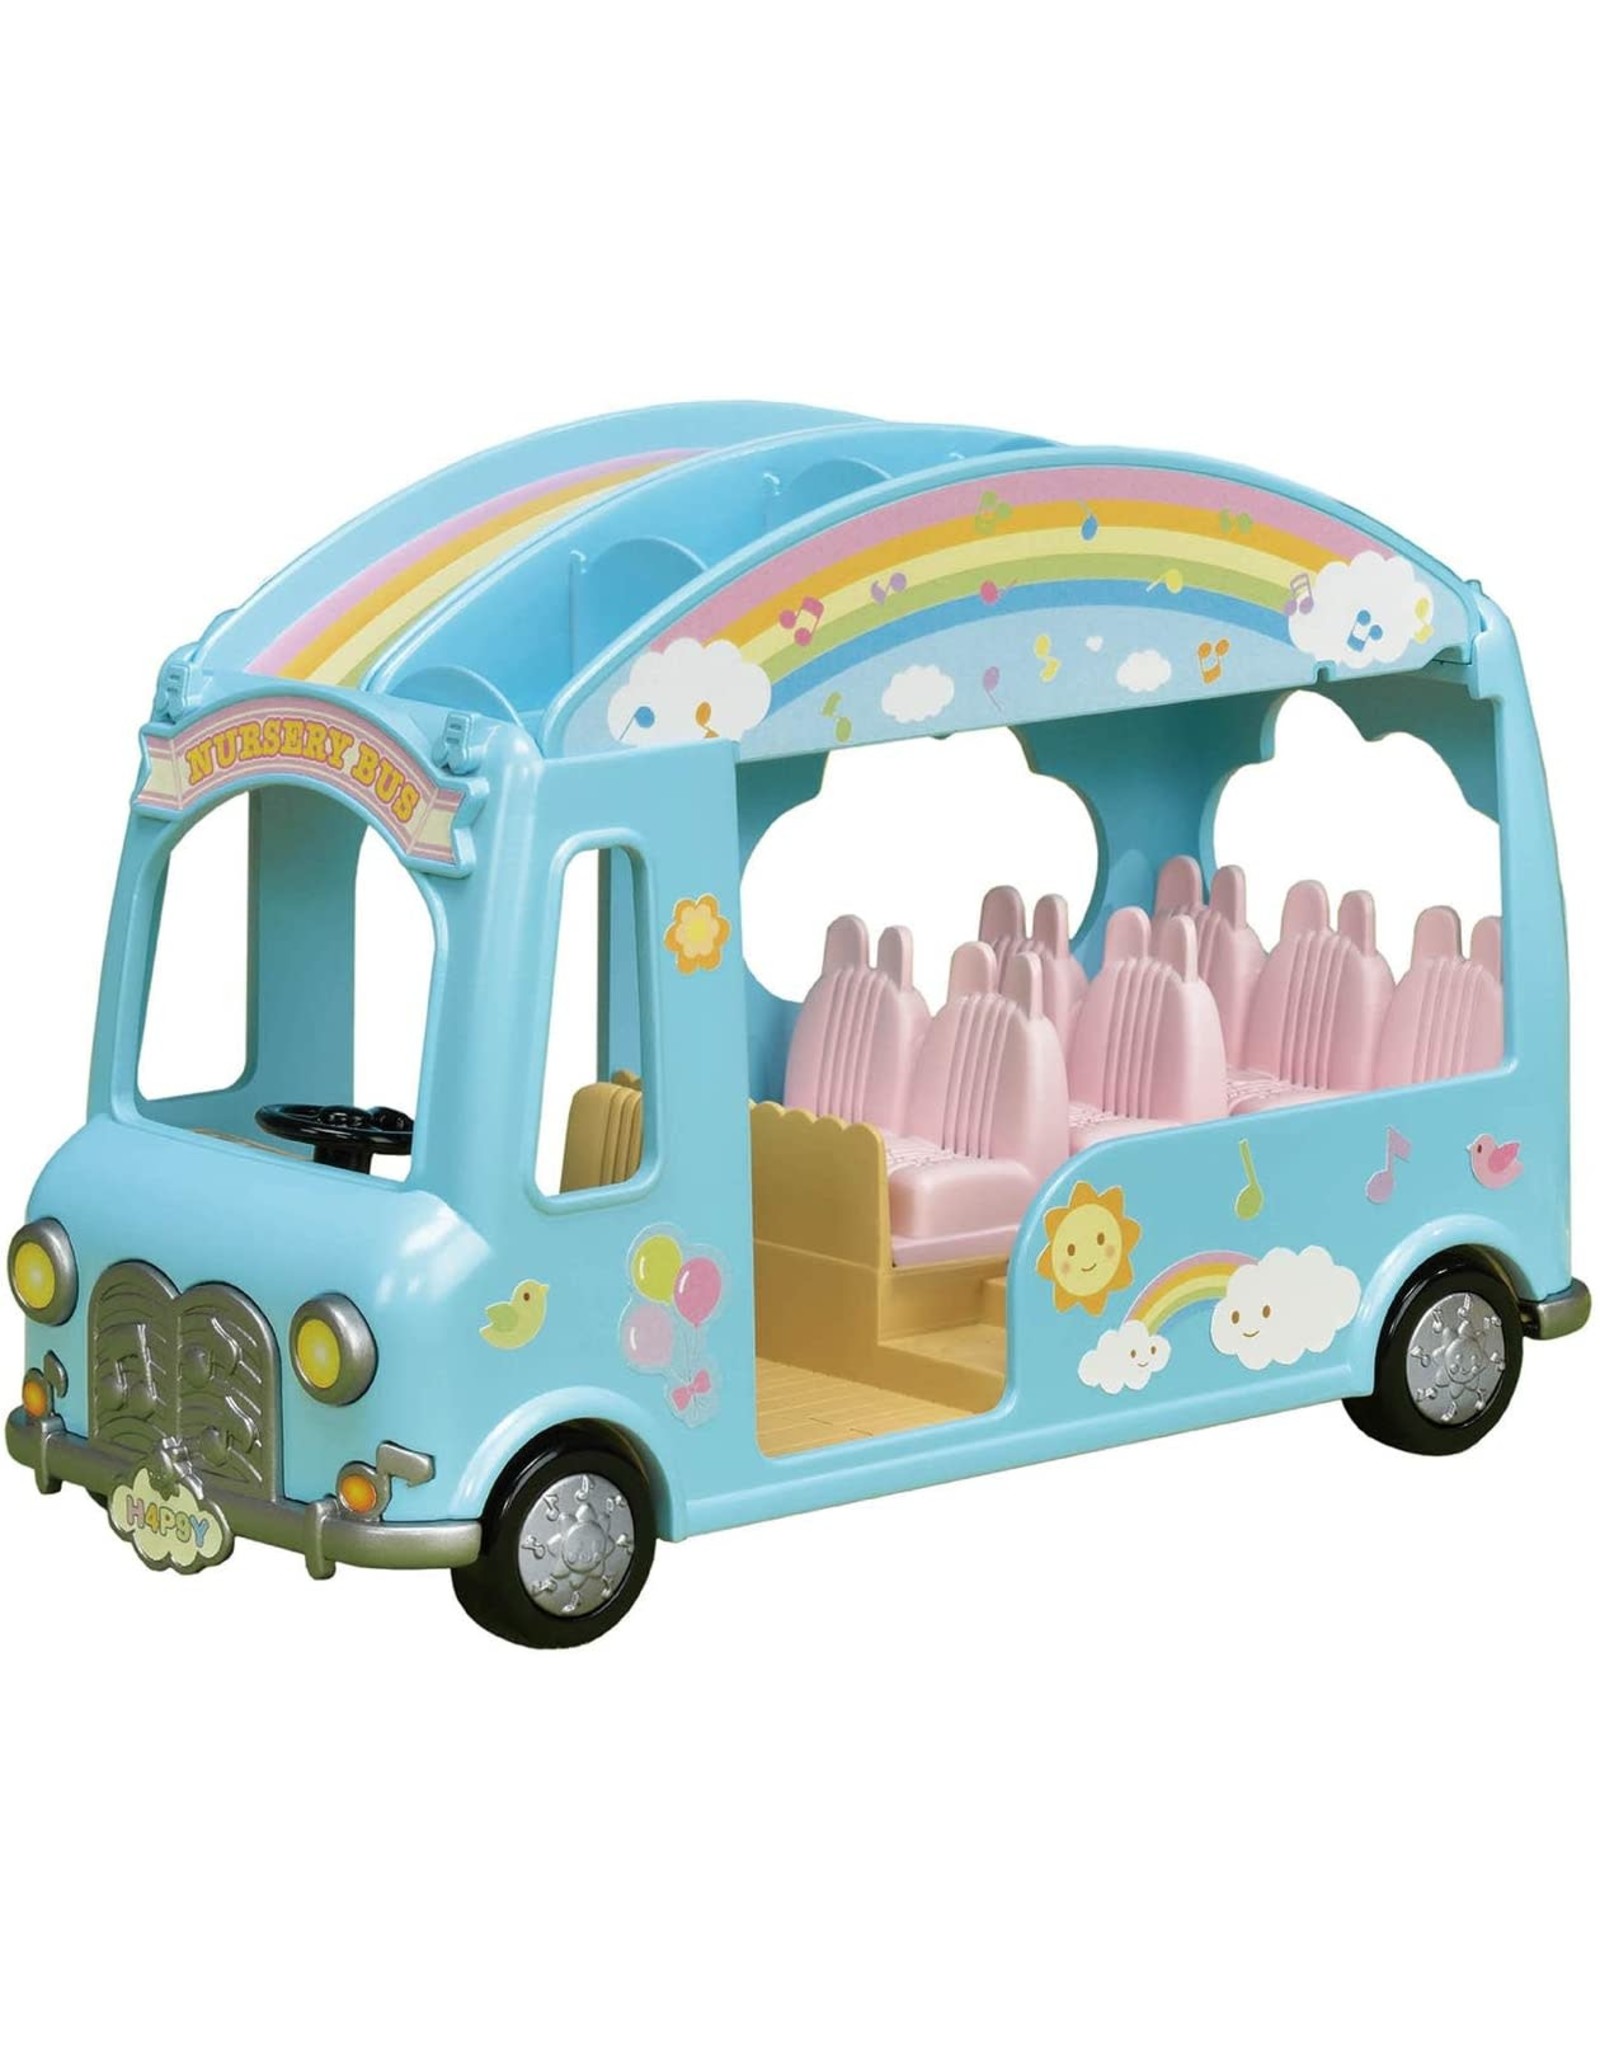 Calico Critters Calico Critters Sunshine Nursery Bus